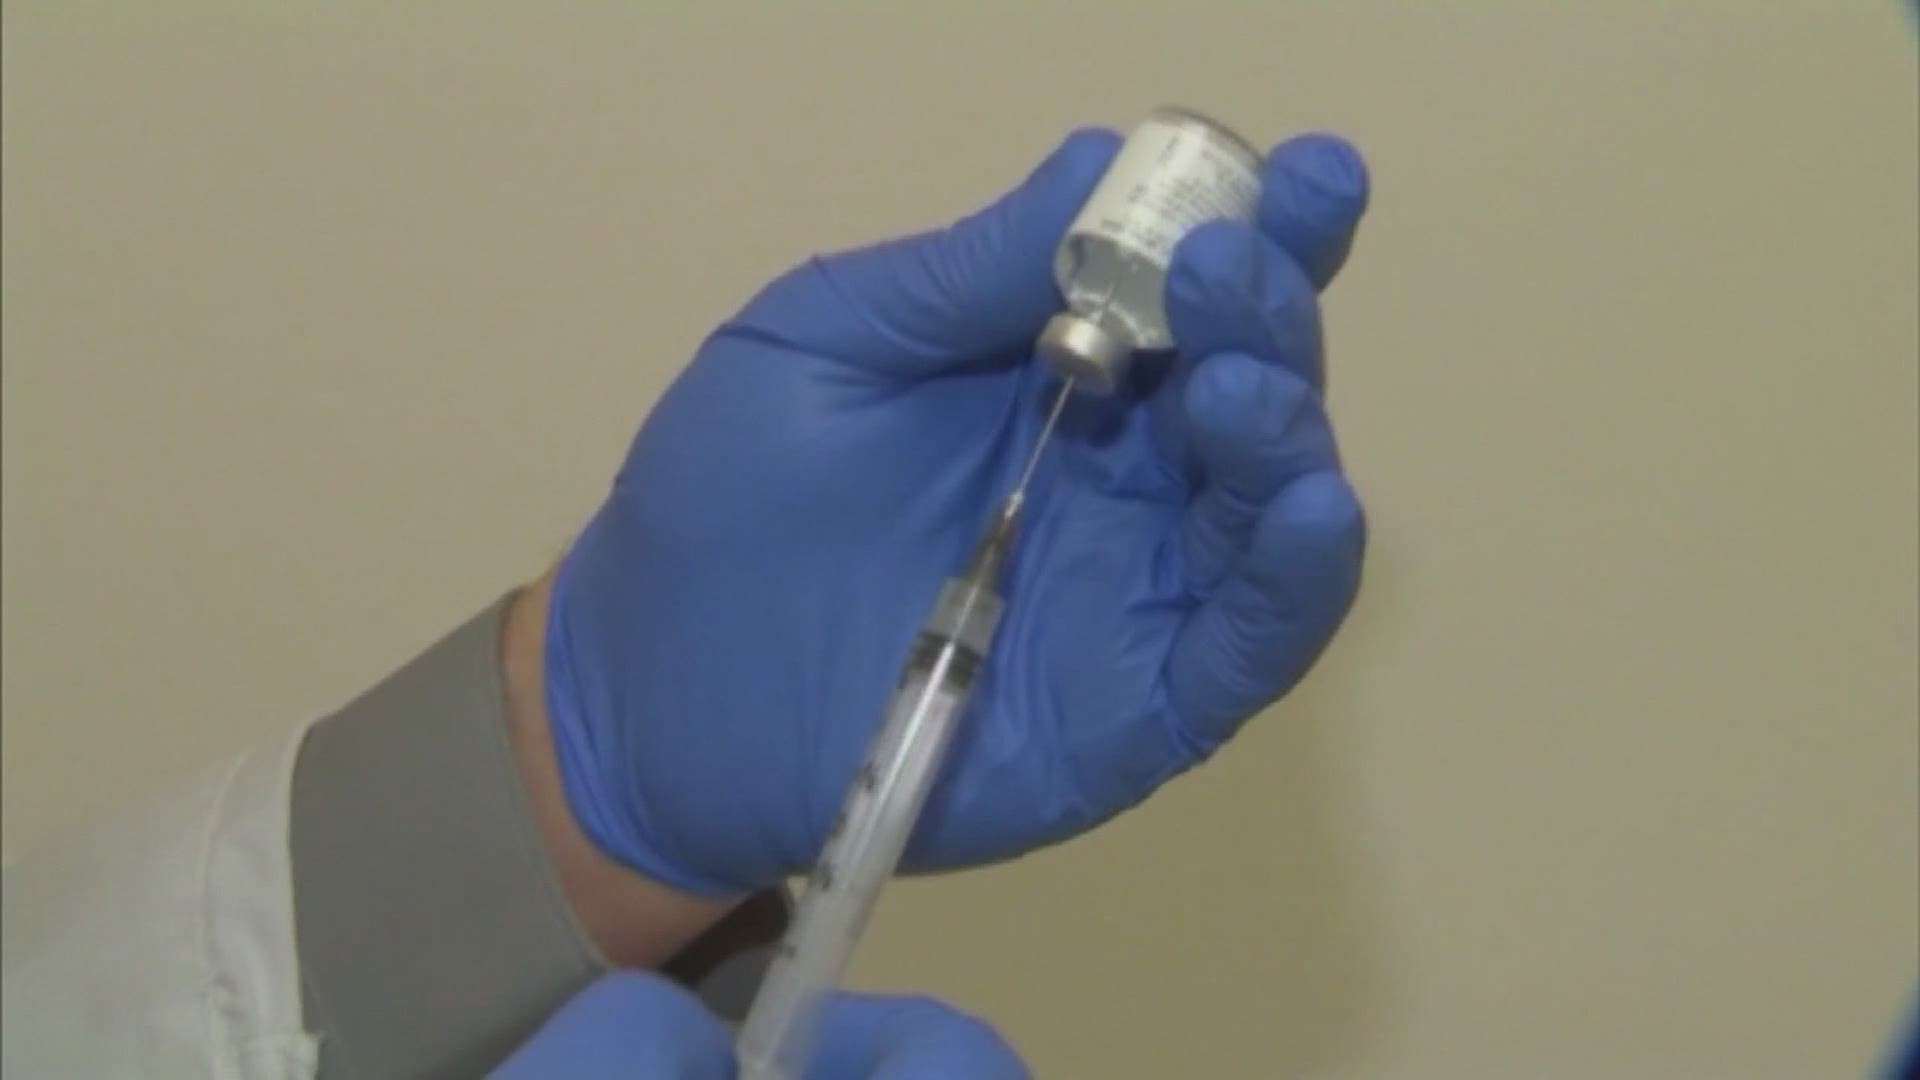 Doses of the vaccine could be completely administered to residents and staff at Bickford Senior Living of Moline as soon as mid-February.